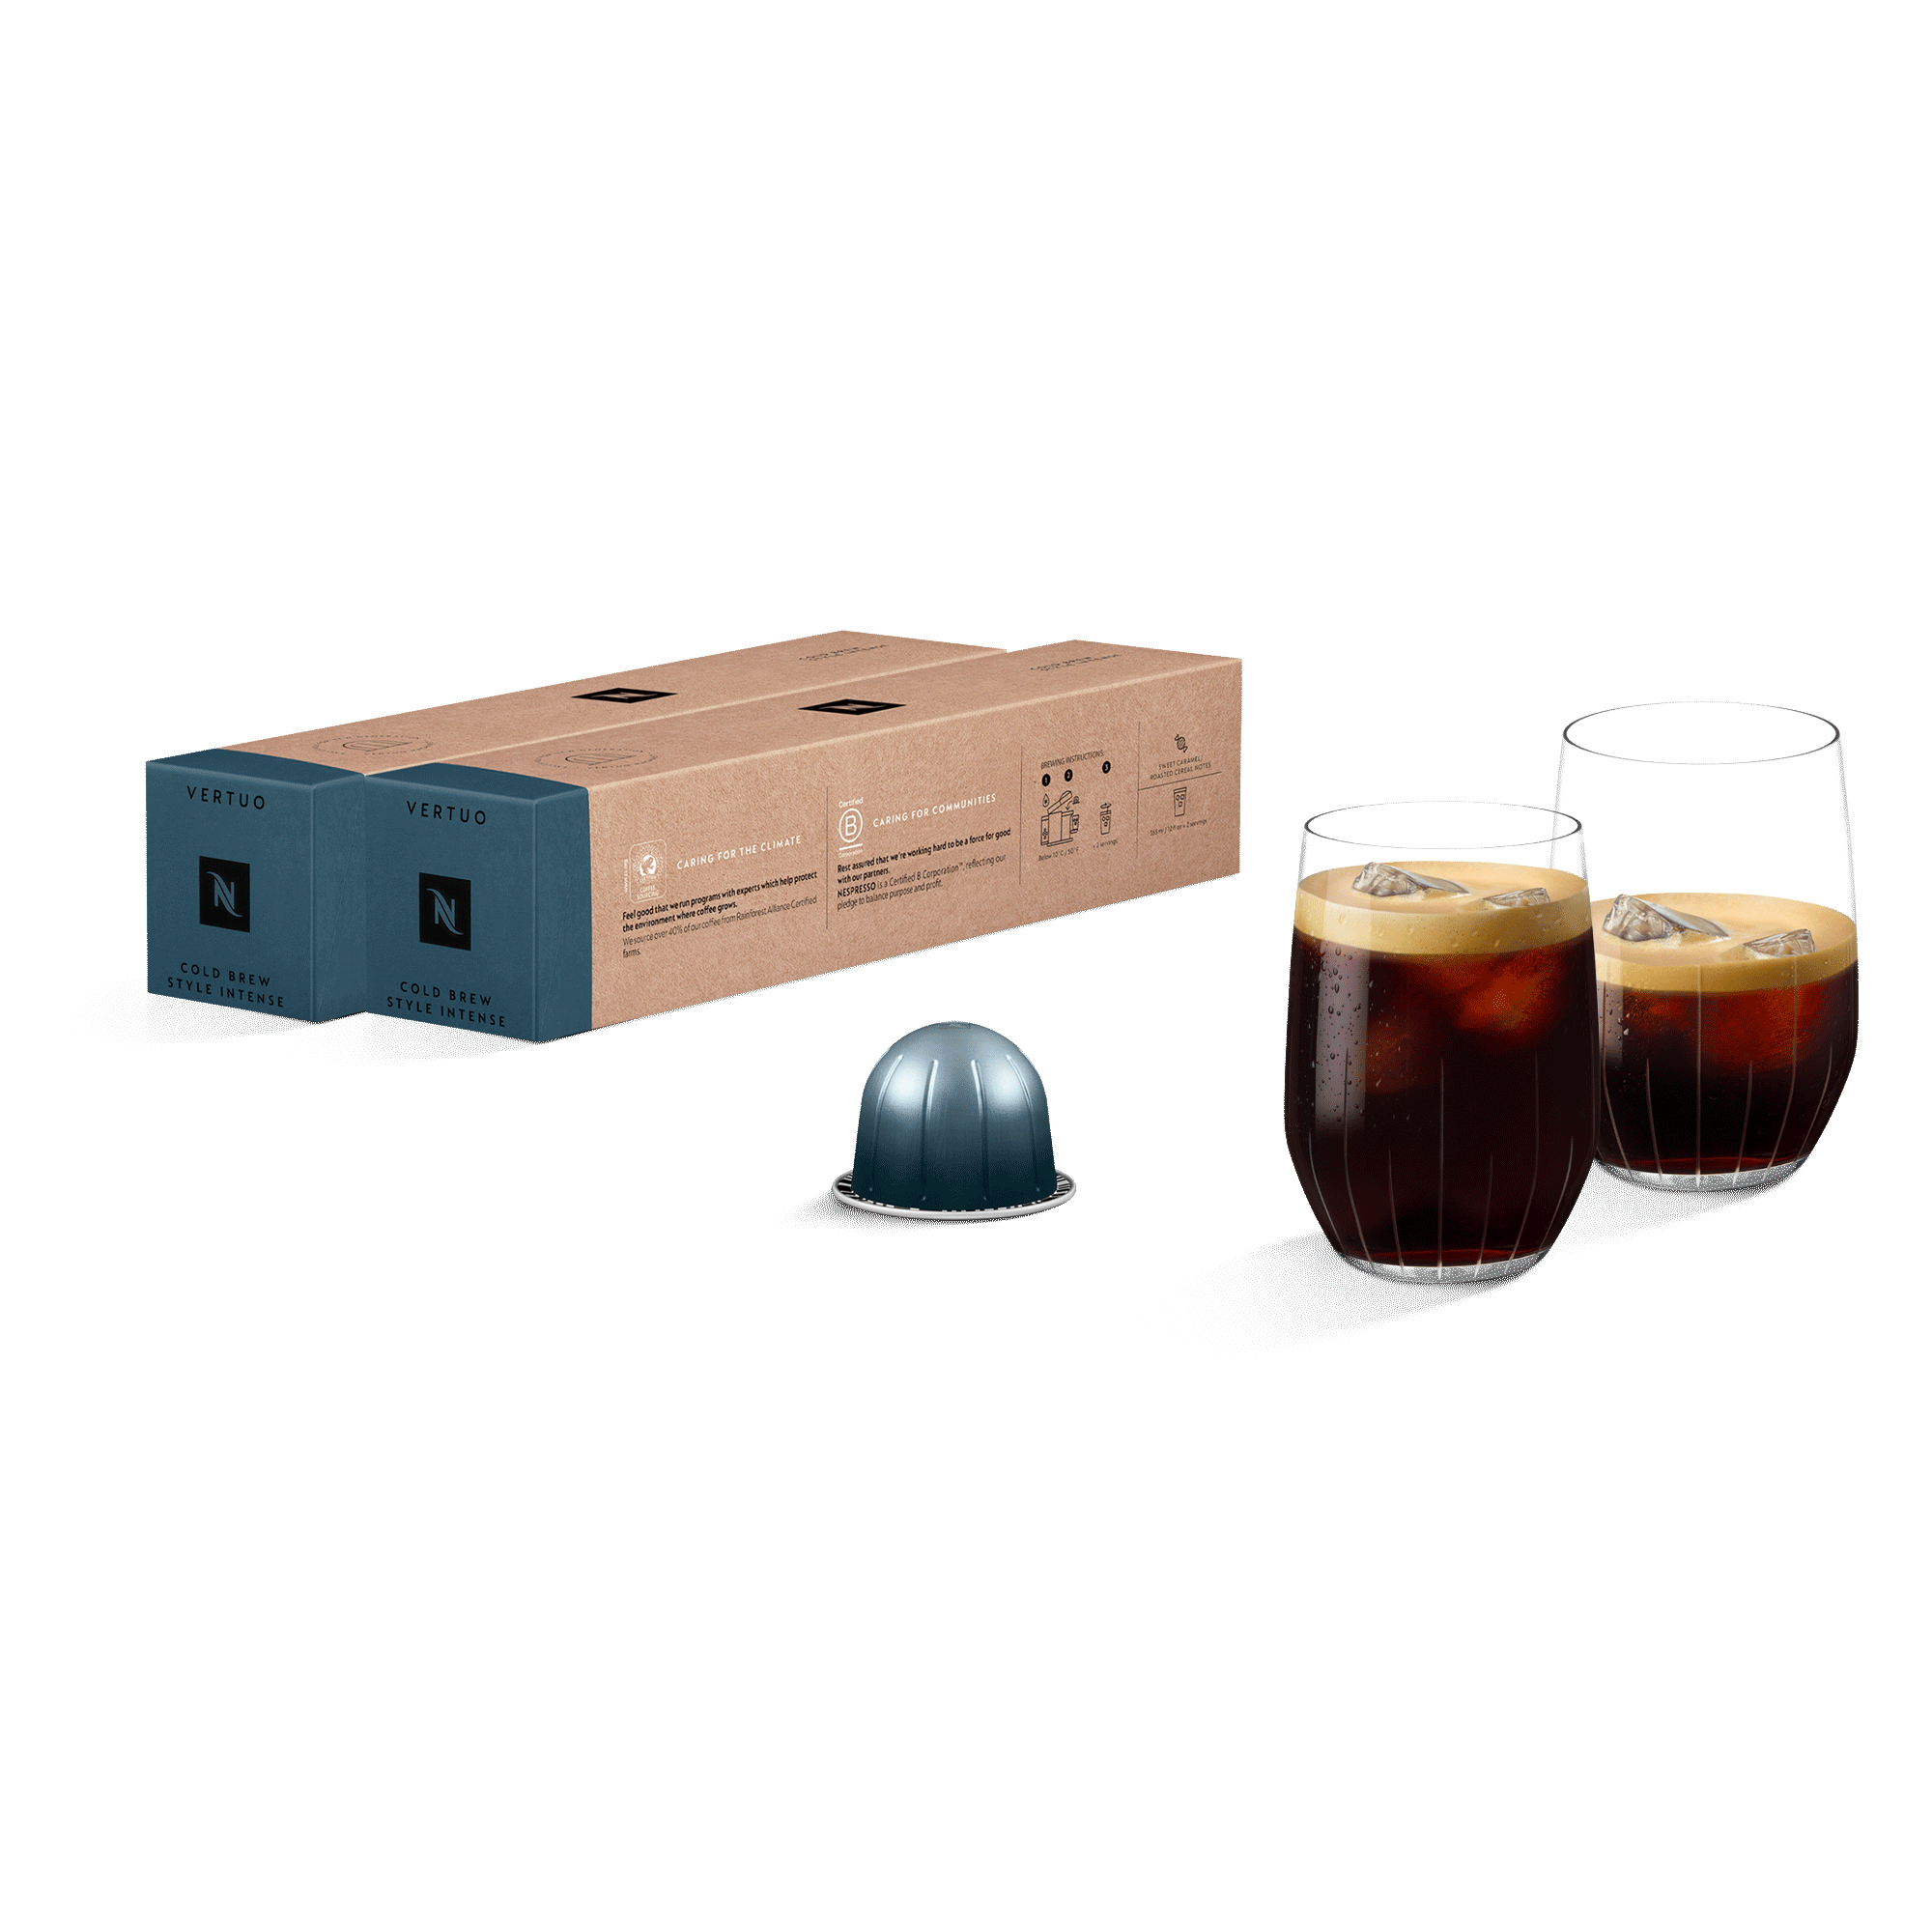 Nespresso Limited Edition Barista 20 oz Drink Cocktail Iced Coffee Shaker